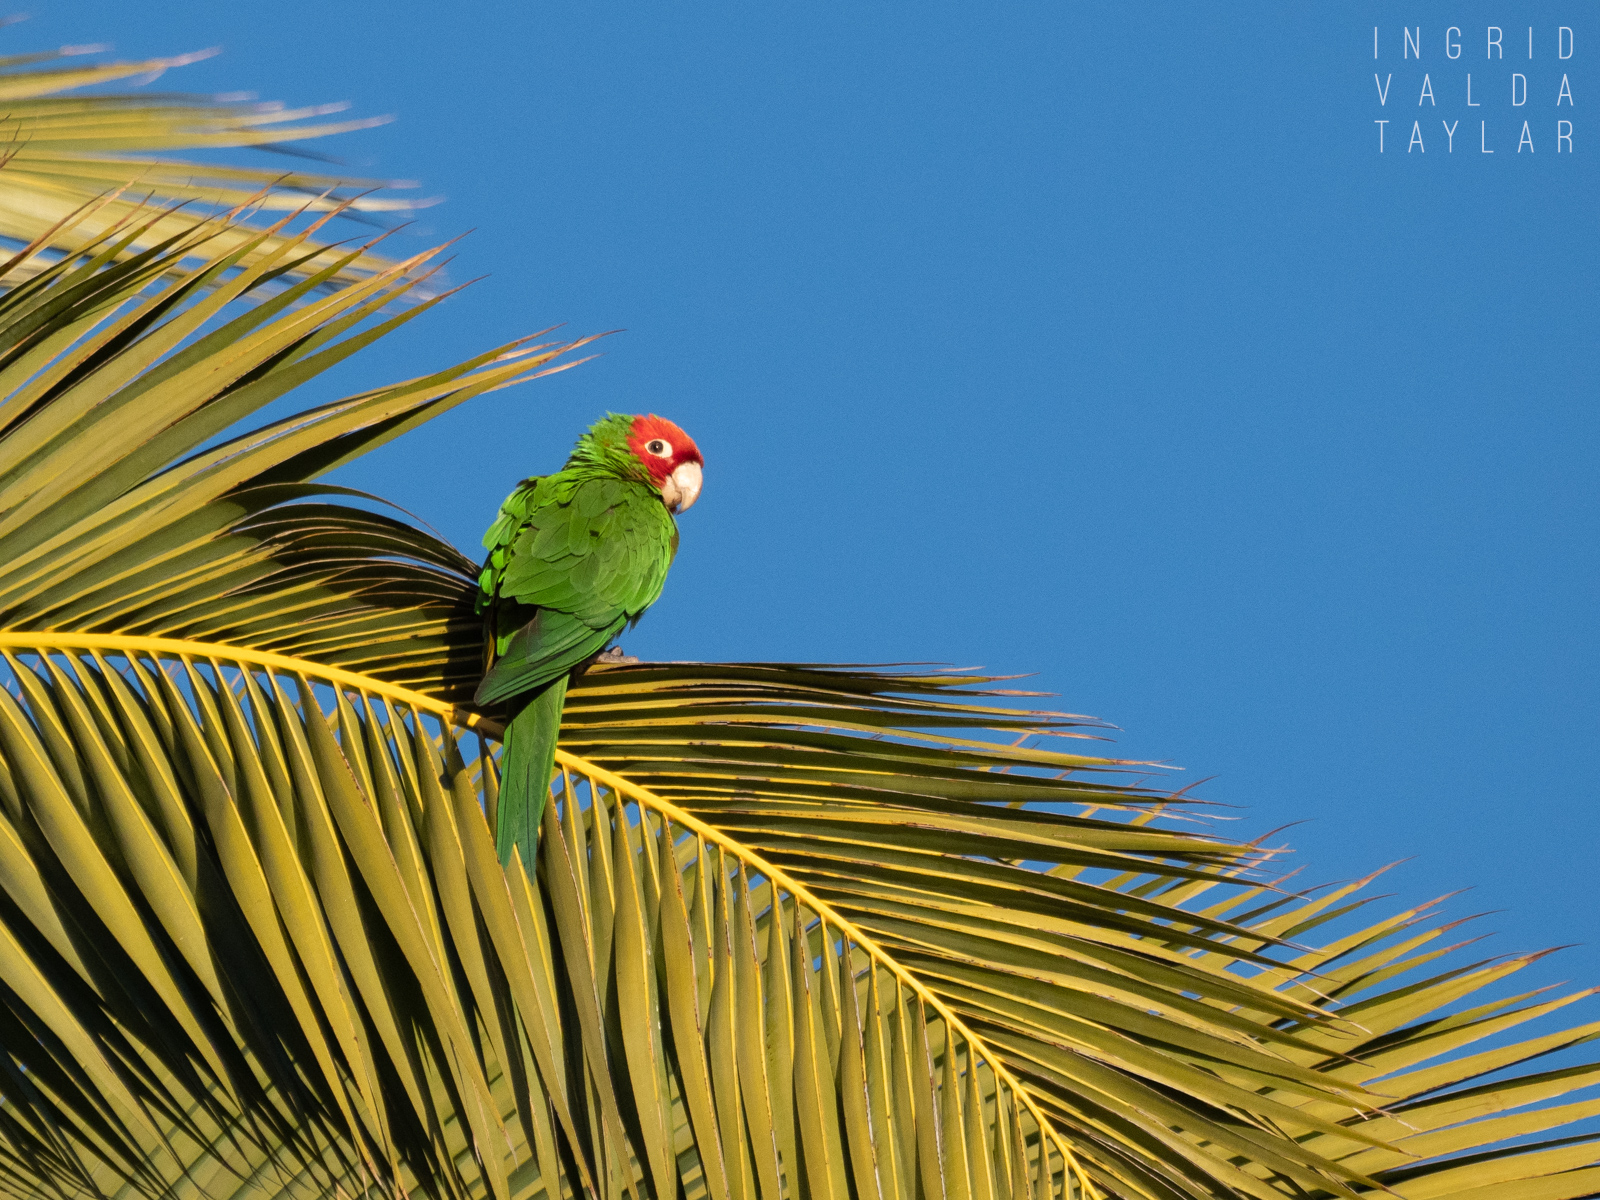 Wild Parrot Cherry-Headed Conure in San Francisco